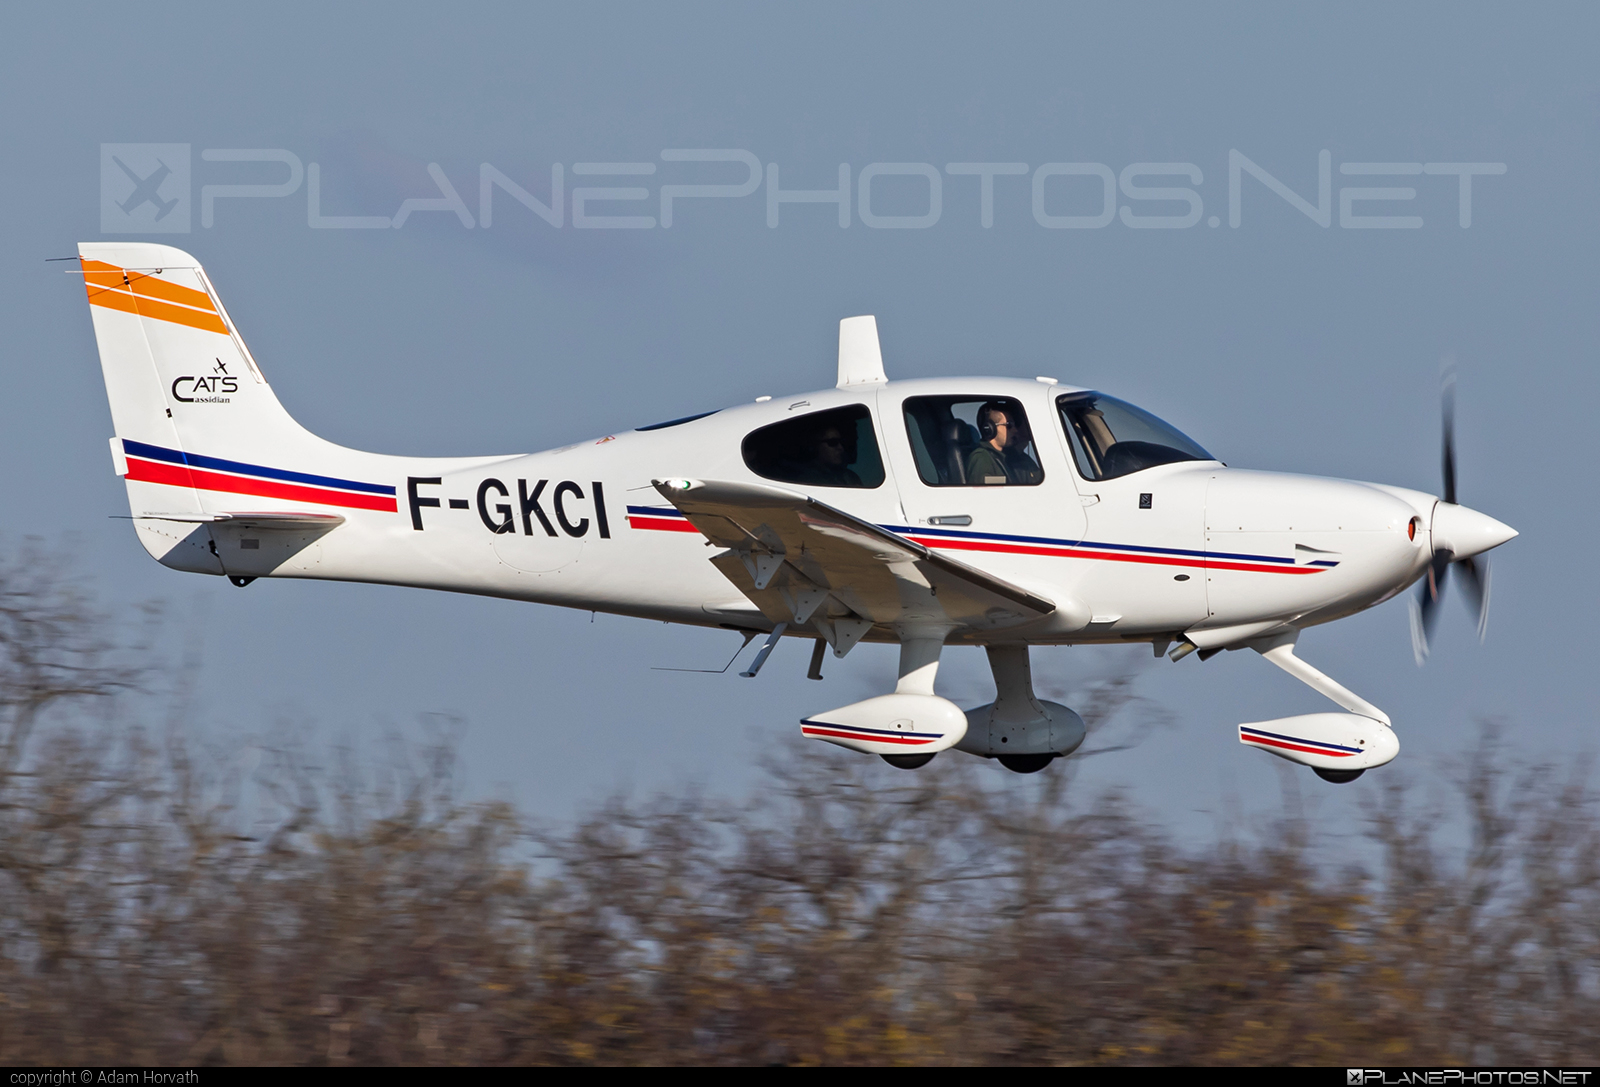 Cirrus SR22 - F-GKCI operated by CASSIDIAN Aviation Training Services #cassidianaviation #cassidianaviationtrainingservices #cirrus